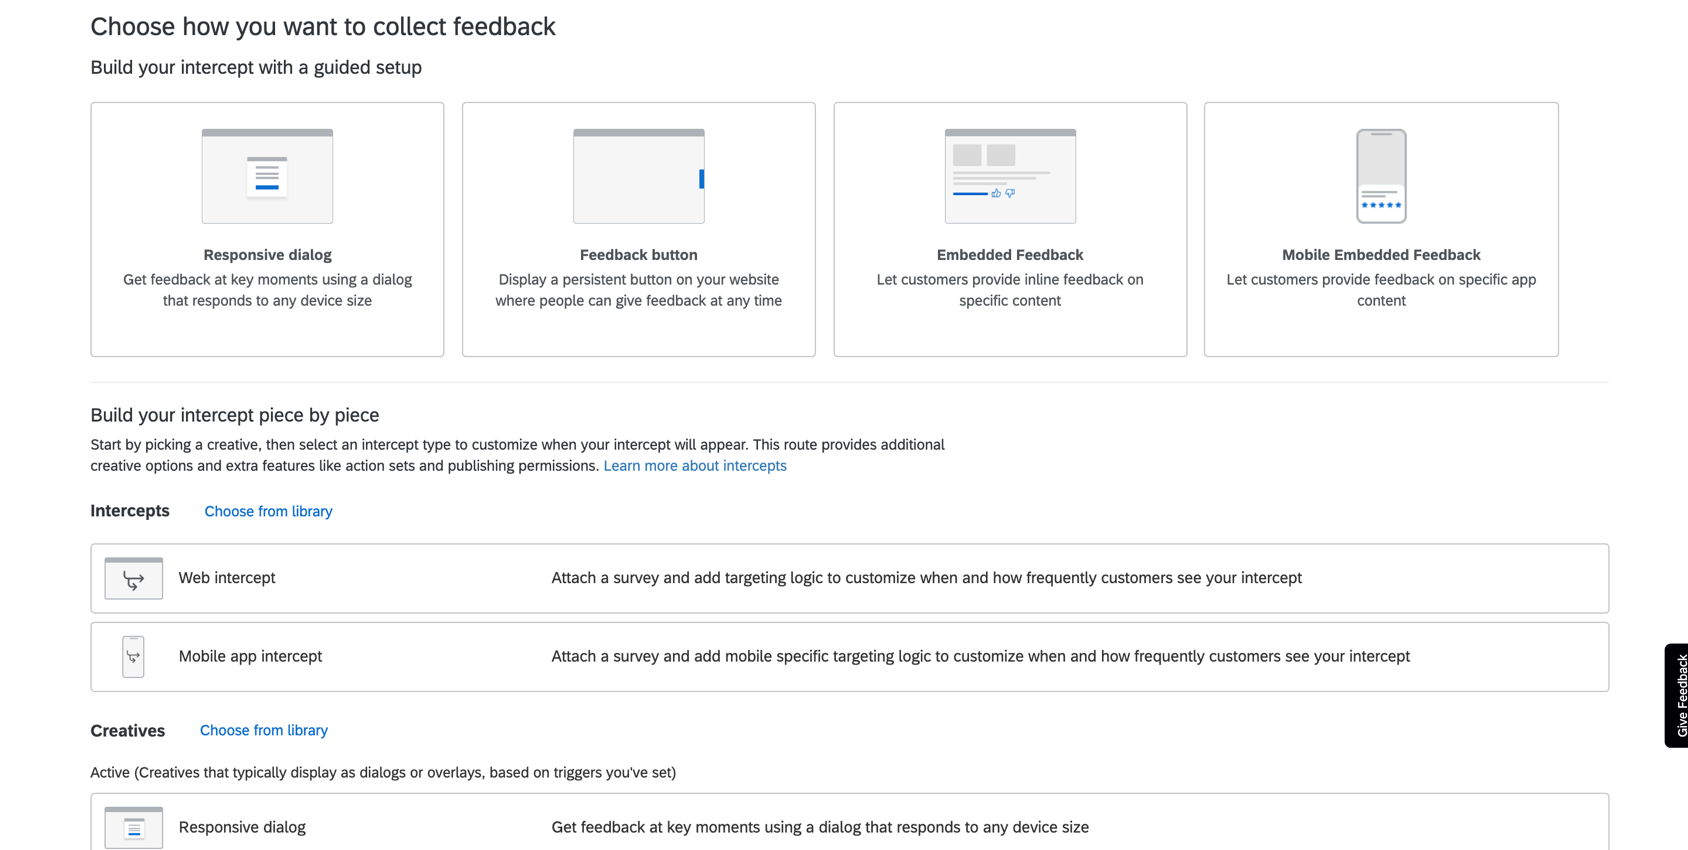 The trust feedback slider used to get feedback from the participants